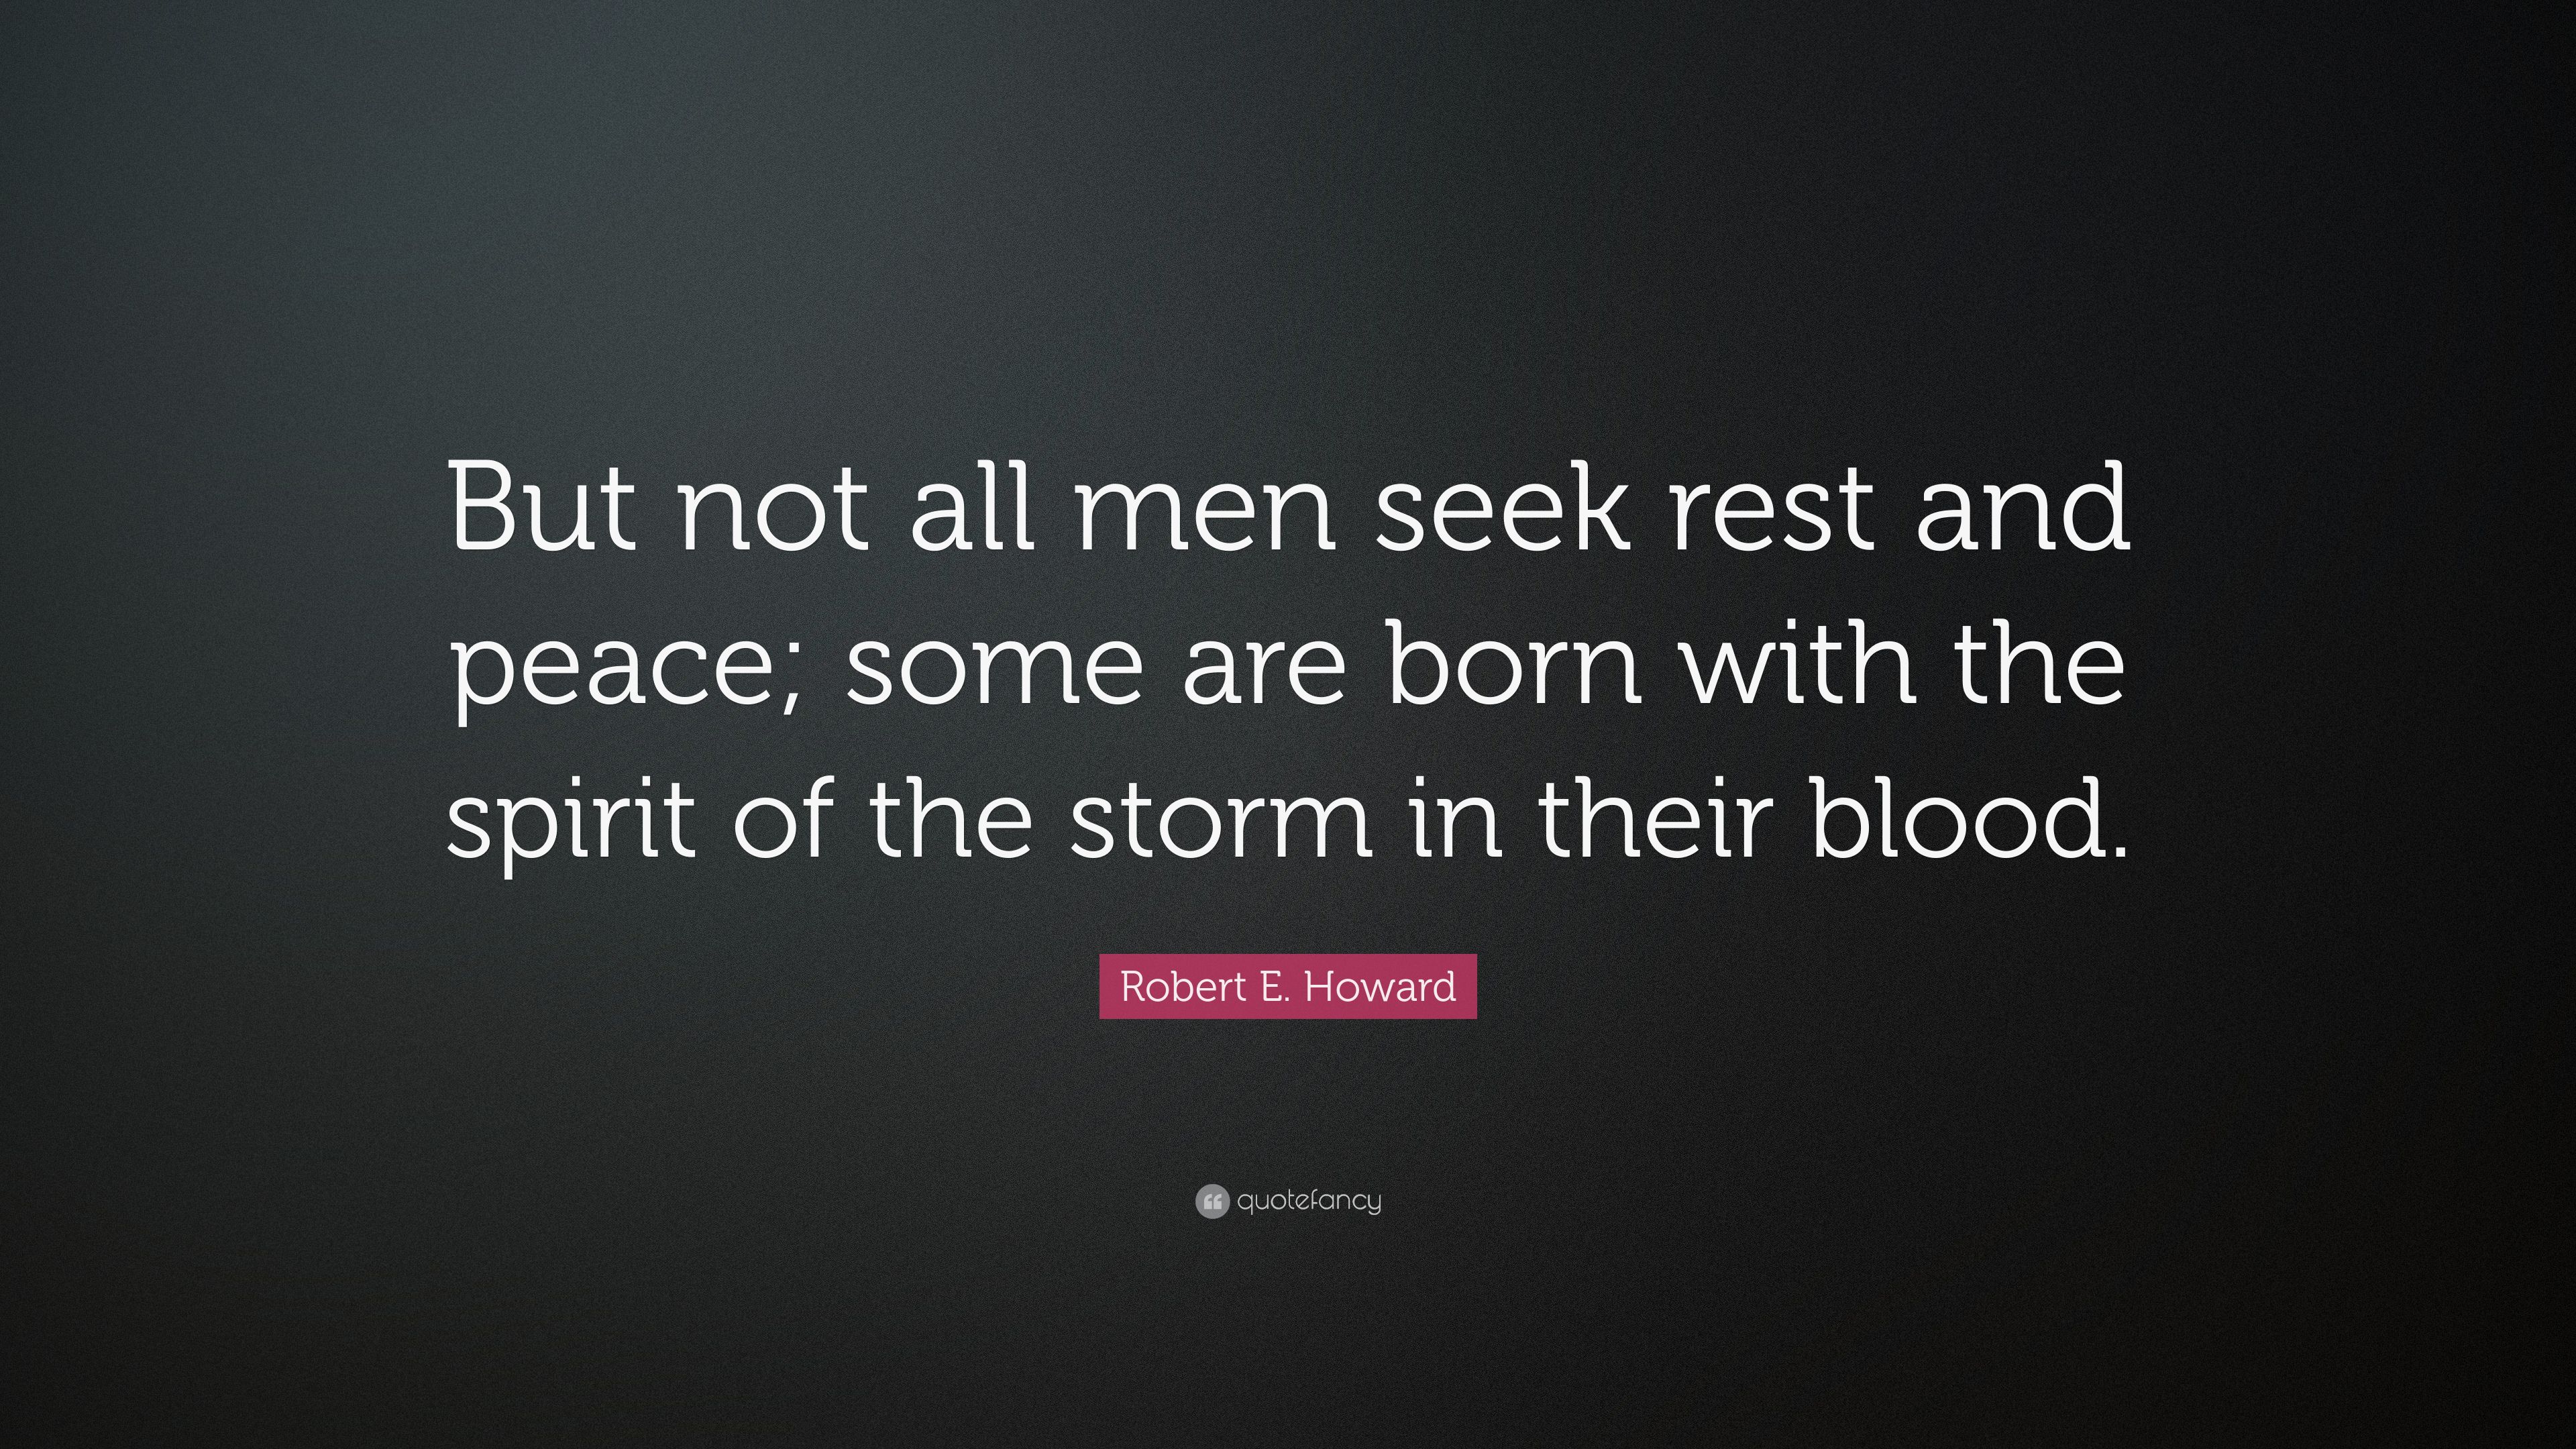 Robert E. Howard Quote: “But not all men seek rest and peace; some